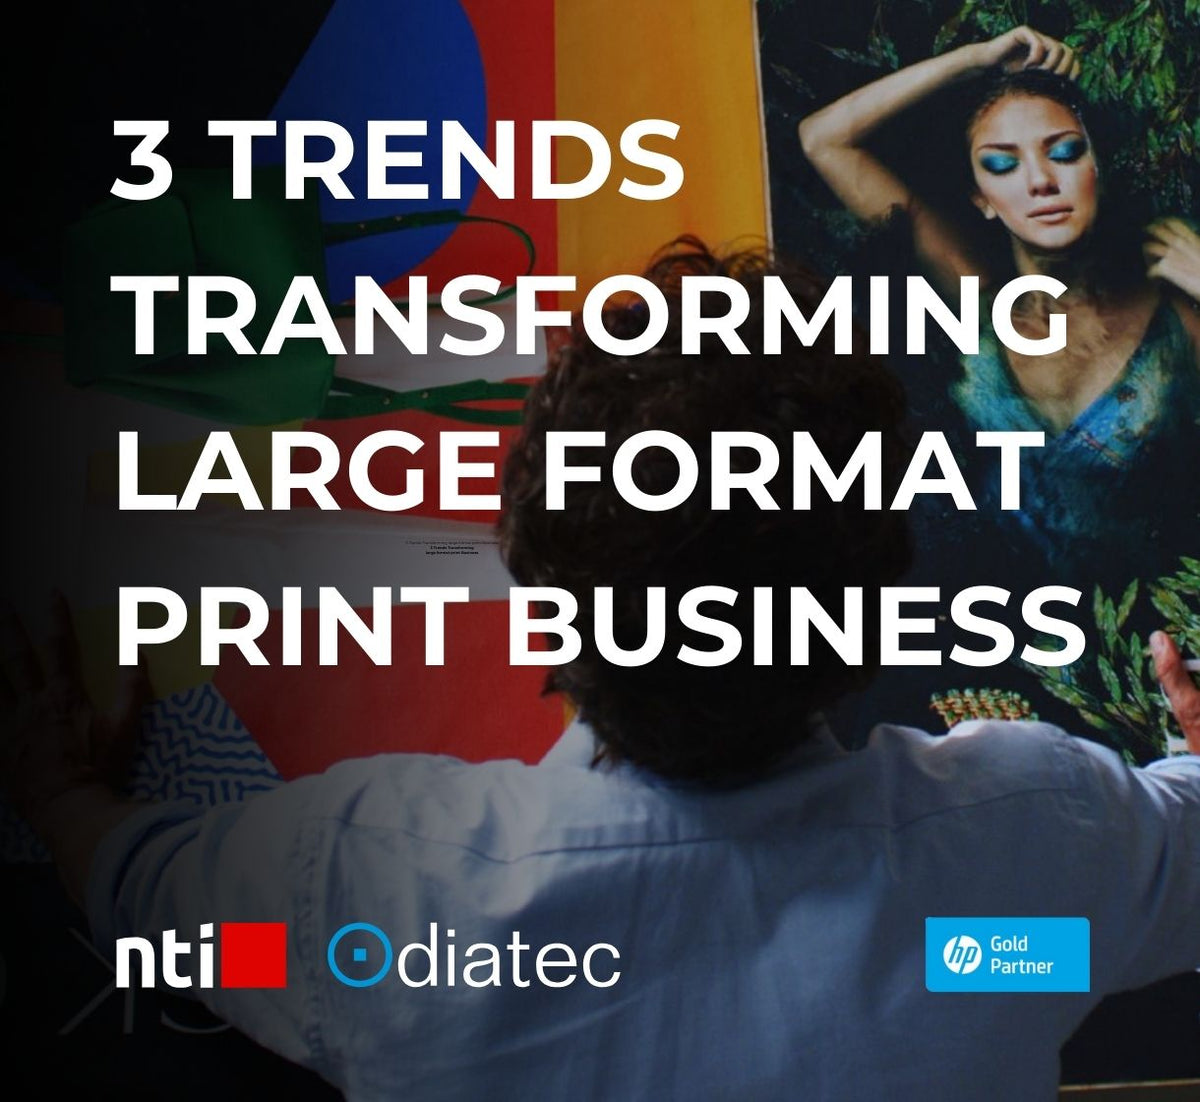 3 Trends transforming large format print